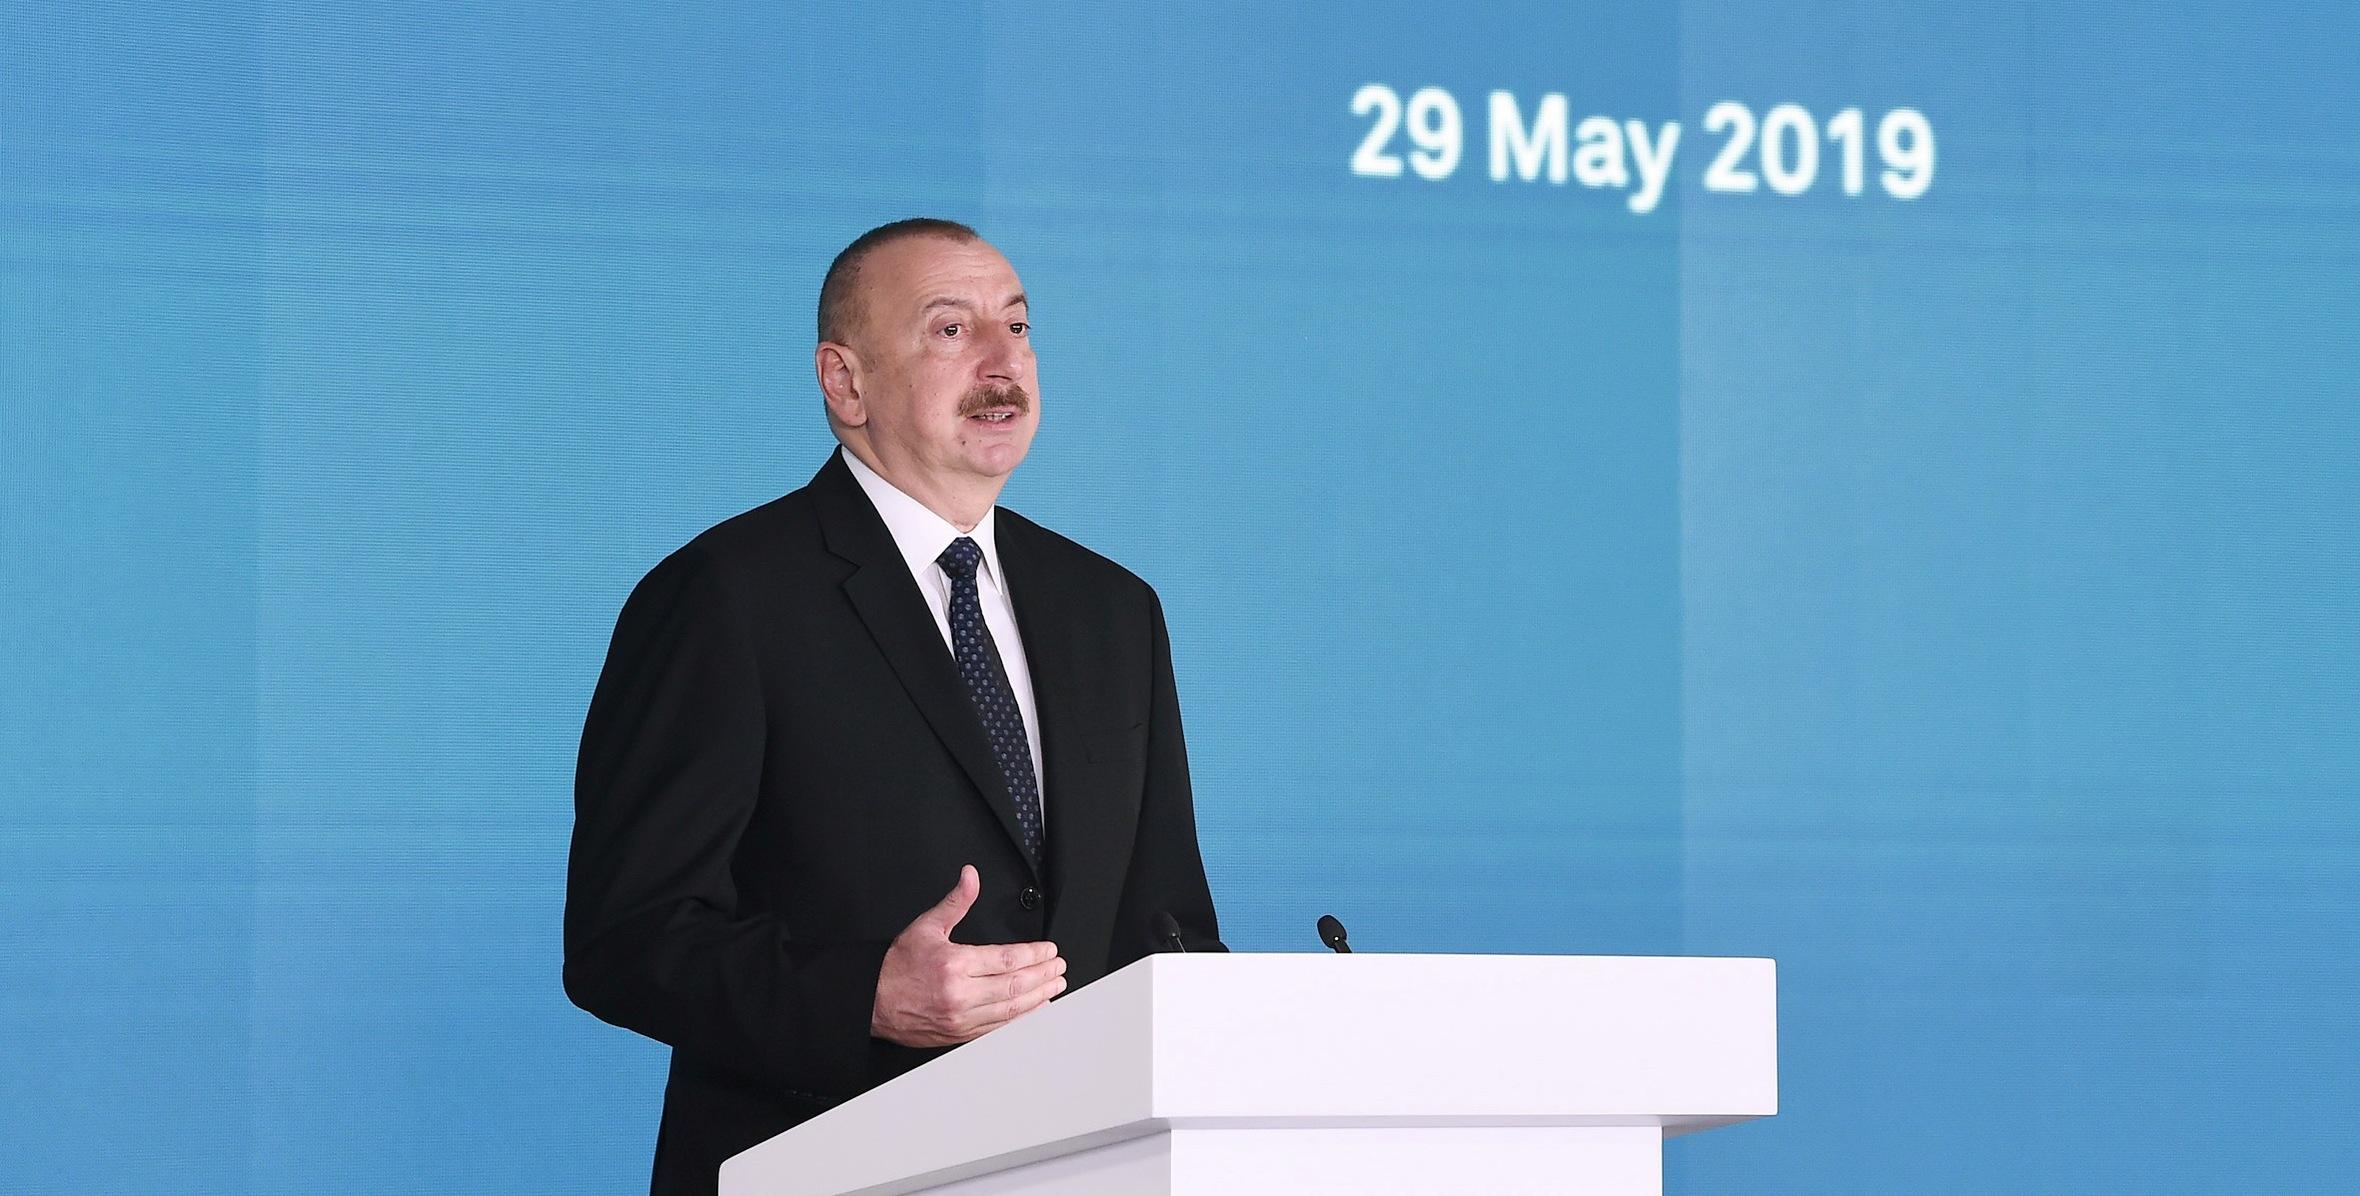 Speech by Ilham Aliyev at the opening of 26th International Caspian Oil & Gas-2019 Exhibition and Conference